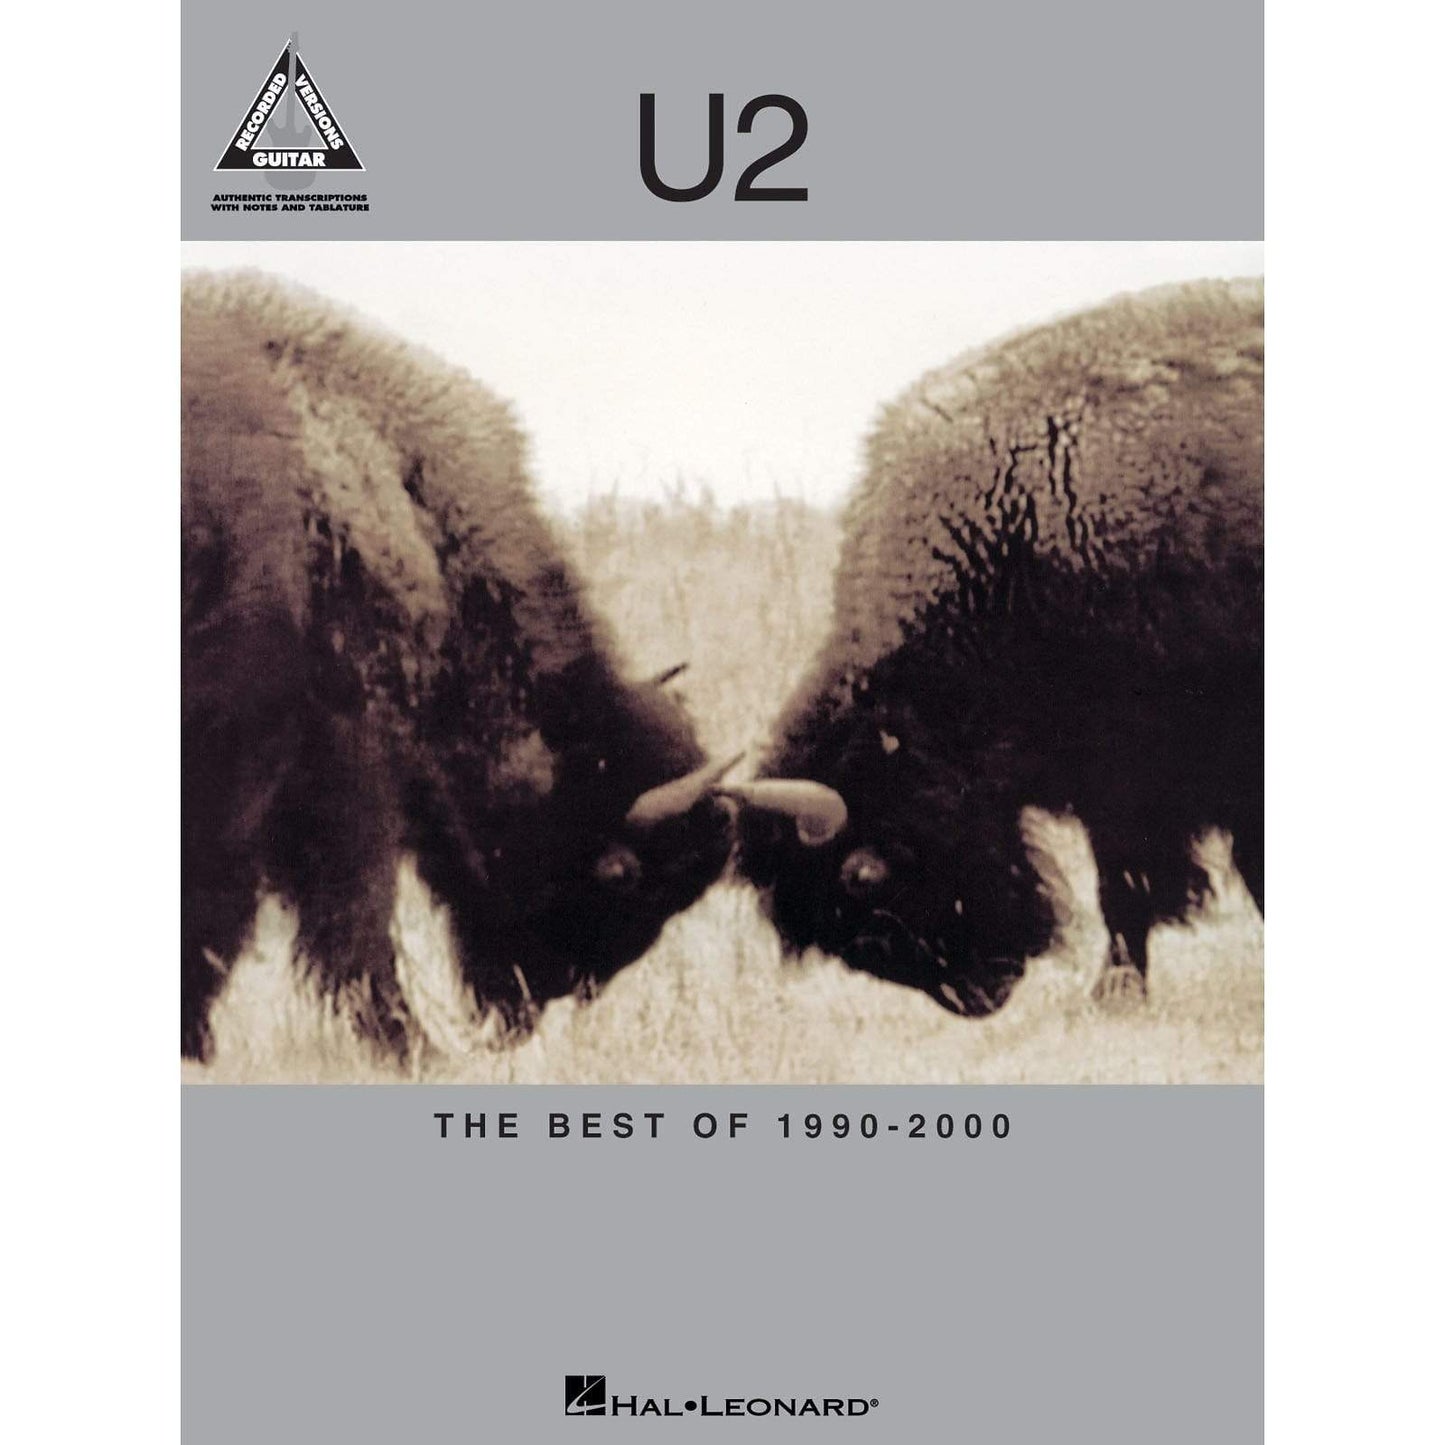 U2 - The Best of 1990-2000 (Guitar Recorded Version) Accessories / Books and DVDs